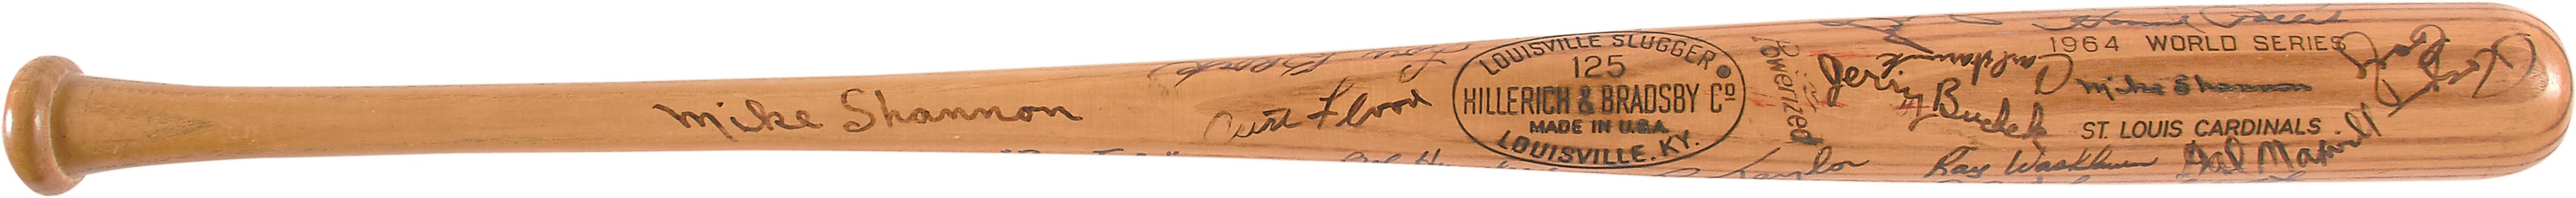 1964 Mike Shannon World Series Bat Signed by Cardinals Team